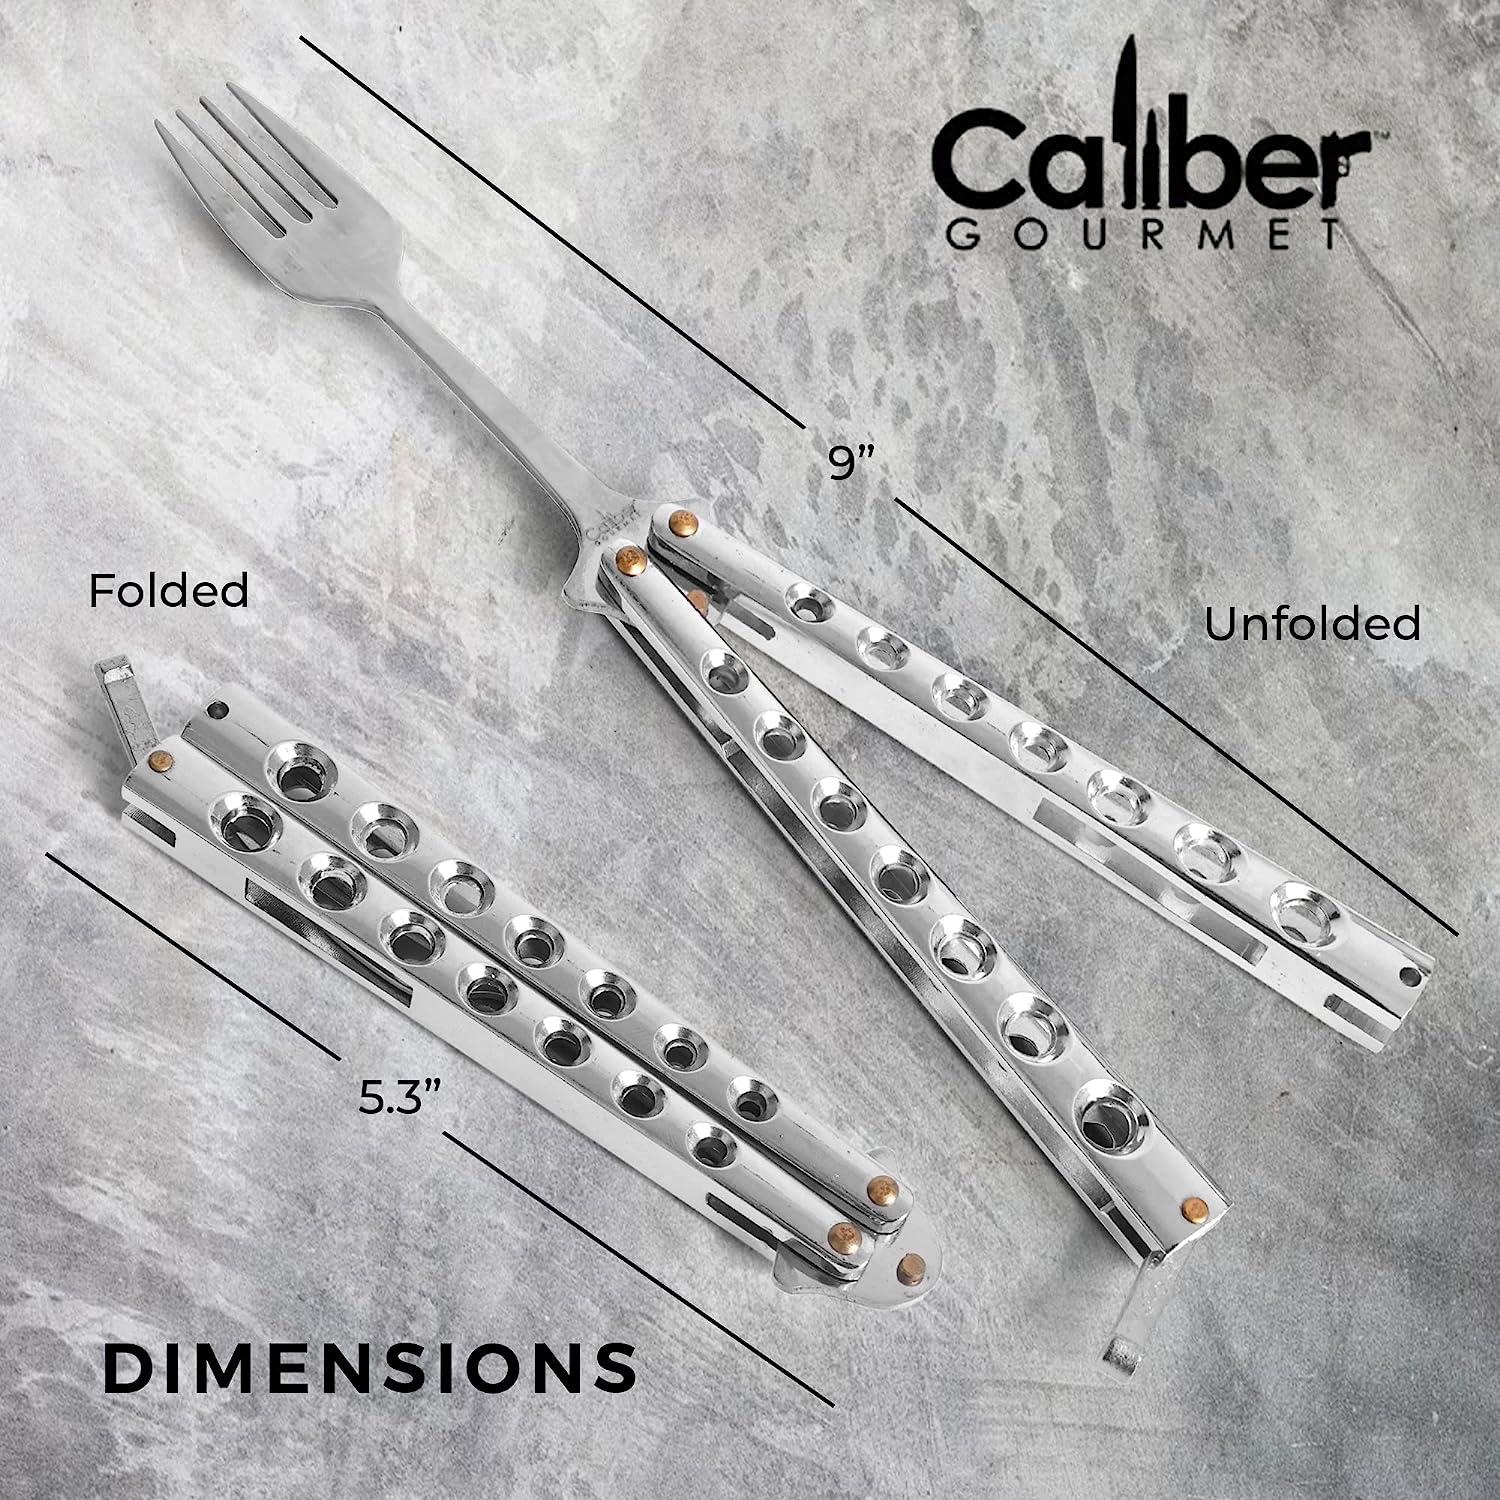 Caliber Gourmet Tactical Butterfly Knife Spoon, Folding Stainless